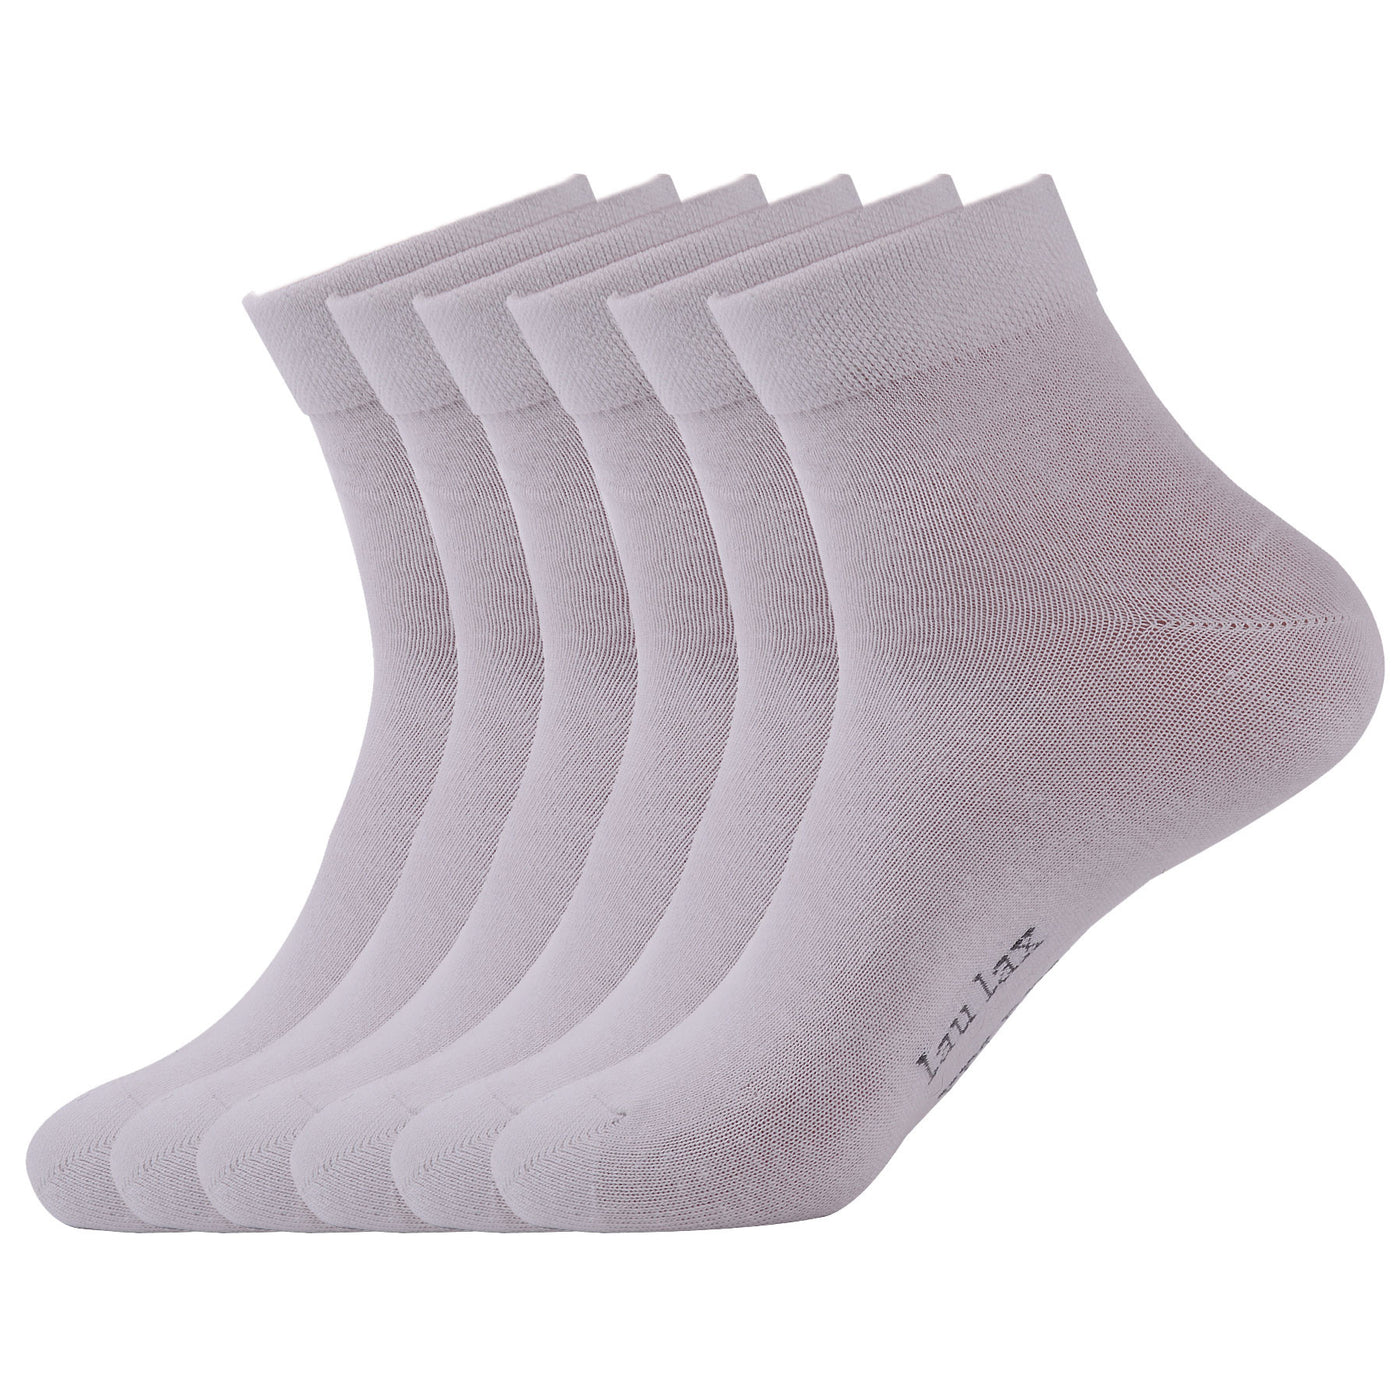 6 Pairs Finest Combed Cotton Smooth Seamless Toe Socks, White, Gift Set